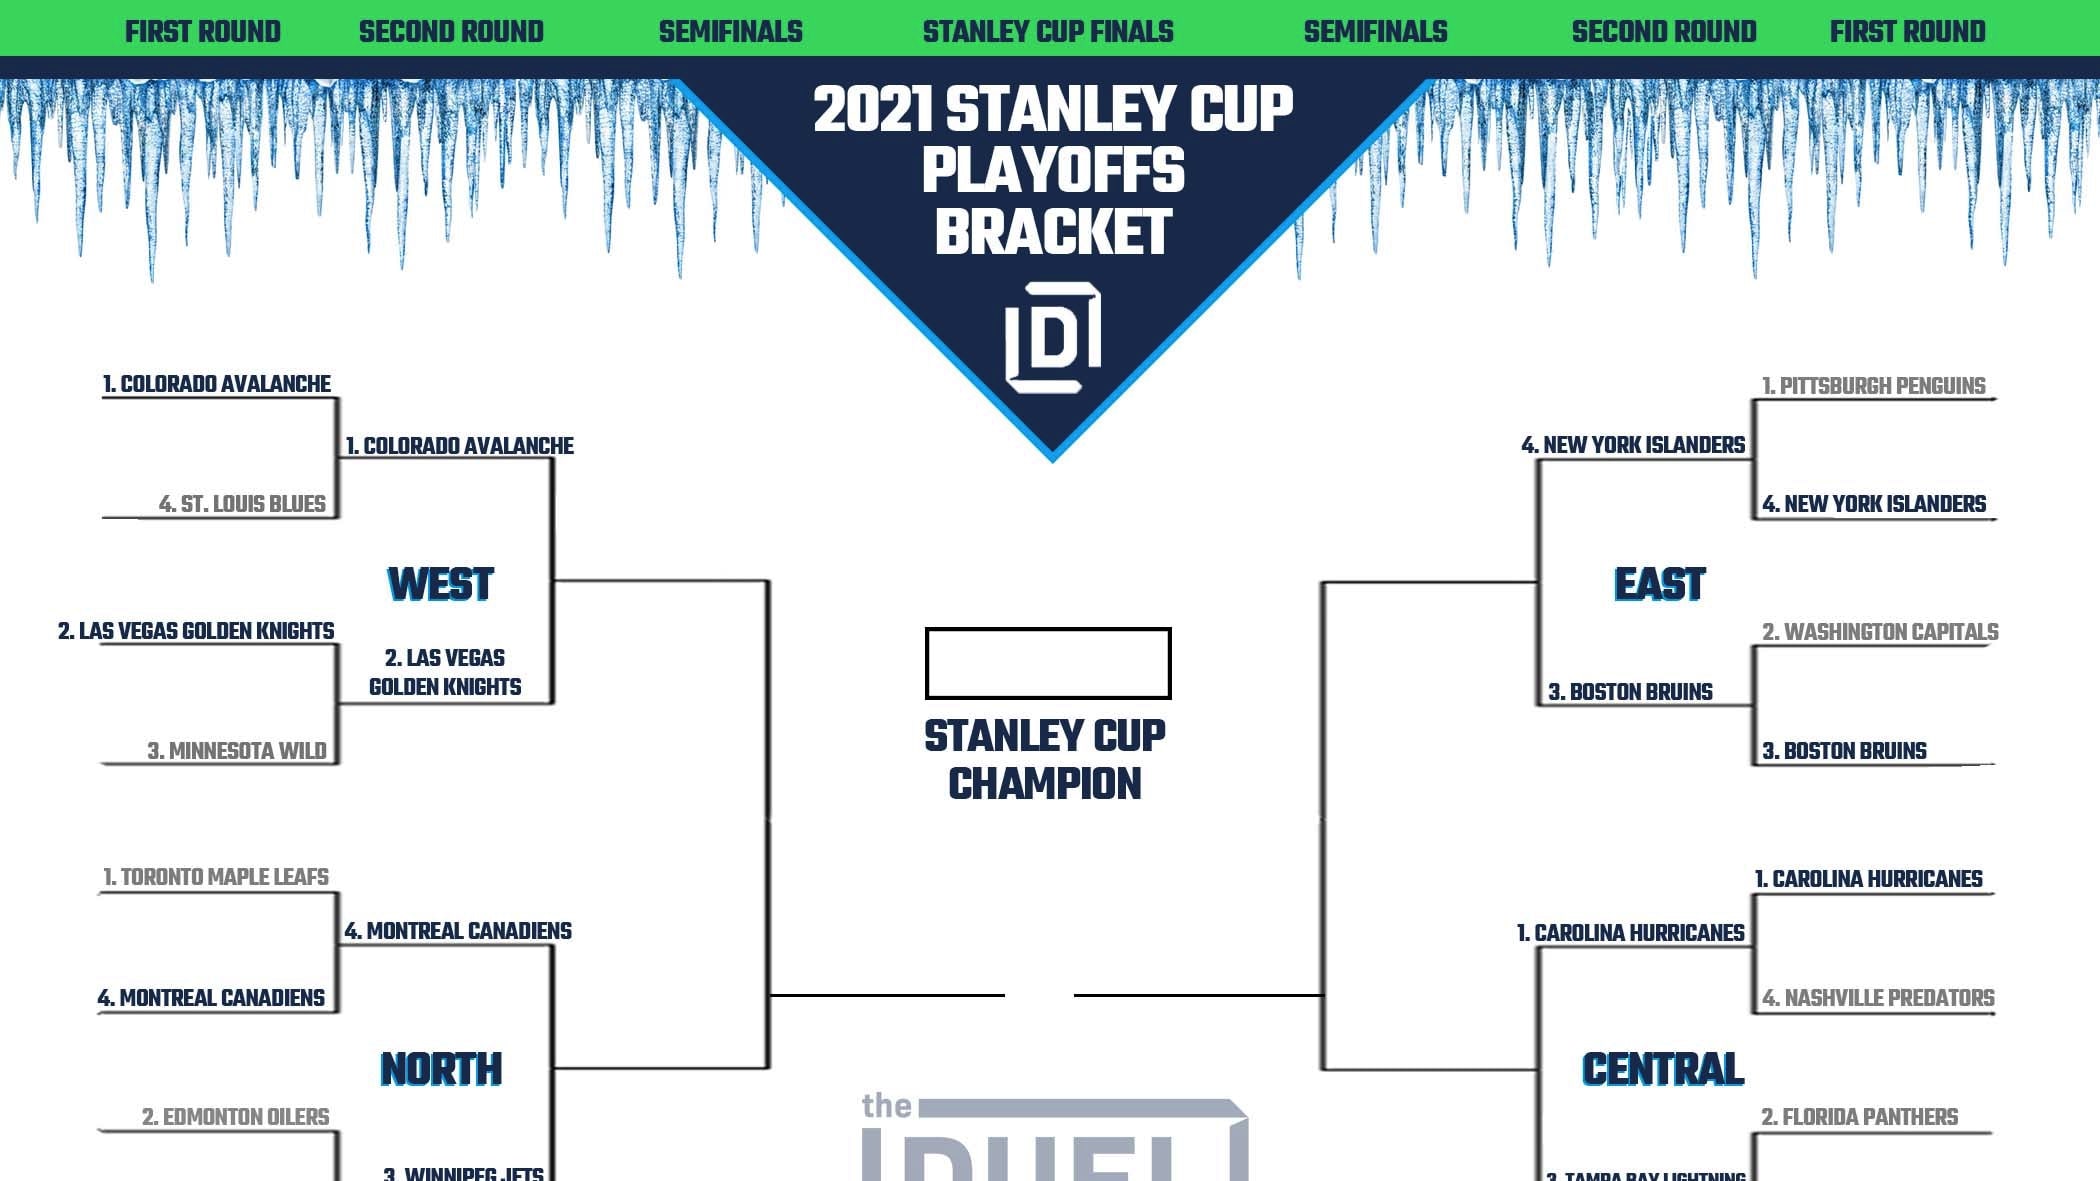 NHL Printable Bracket for 2021 Stanley Cup Playoffs Round 2